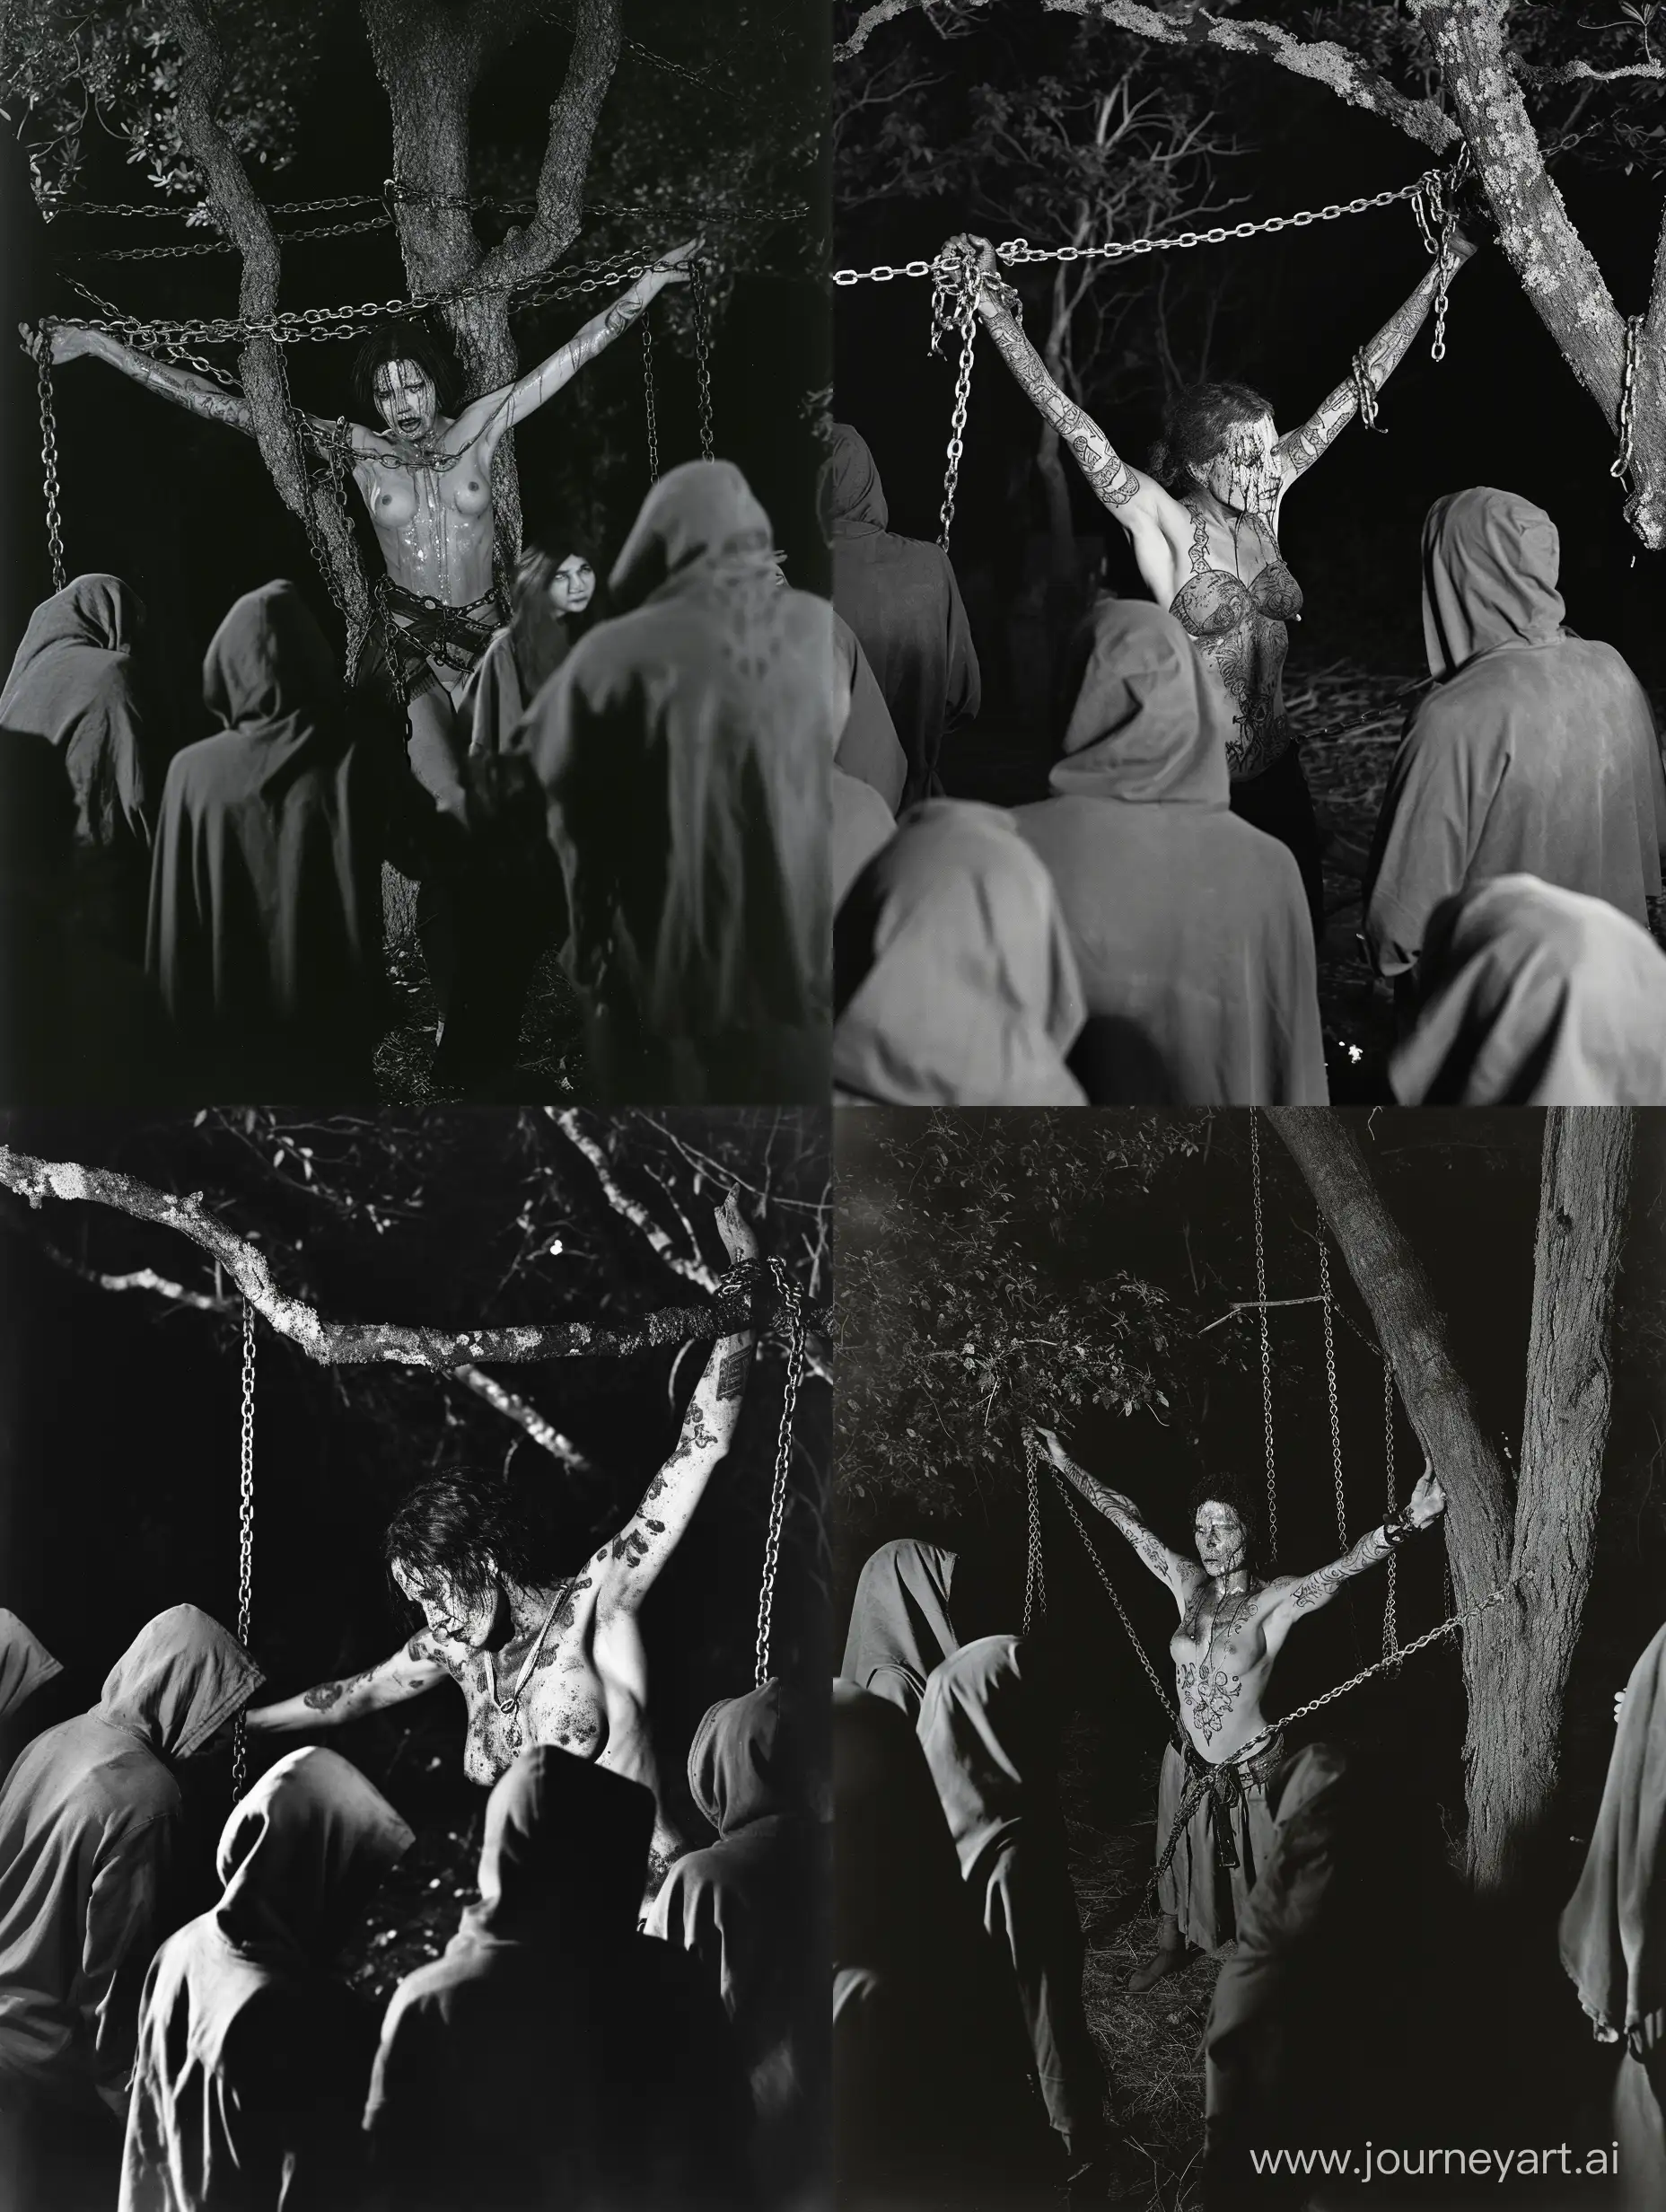 grayscale photo of a woman in a minimalistic forest,
an ominous and unsettling scene unfolds,
tear-stained face, body adorned with ominous tattoos.

Her arms, stretched open and bound to tree branches,
chains tightly securing her in a vulnerable position,
while hooded figures, backs facing the viewer, gather around her,
participating in a mysterious and unsettling ritual.

The photo is captured using Fujifilm Provia film,
enhancing the vividness of colors and contrasts,
as the night scene is illuminated by a flickering campfire,
casting eerie shadows, adding to the sense of foreboding.

The forest serves as the backdrop for this hike core ritual,
its minimalistic beauty contrasting with the intensity of the scene,
creating a chilling ambiance that evokes both fascination and unease.

Unlikely collaborators:
Marina Abramović, the performance artist exploring the limits of the body,
Sally Mann, the photographer capturing haunting and introspective images,
Gareth Pugh, the fashion designer known for his dark and theatrical aesthetics,
Ari Aster, the filmmaker specializing in atmospheric and disturbing narratives,
David Tibet, the musician and artist delving into esoteric and ritualistic themes. 